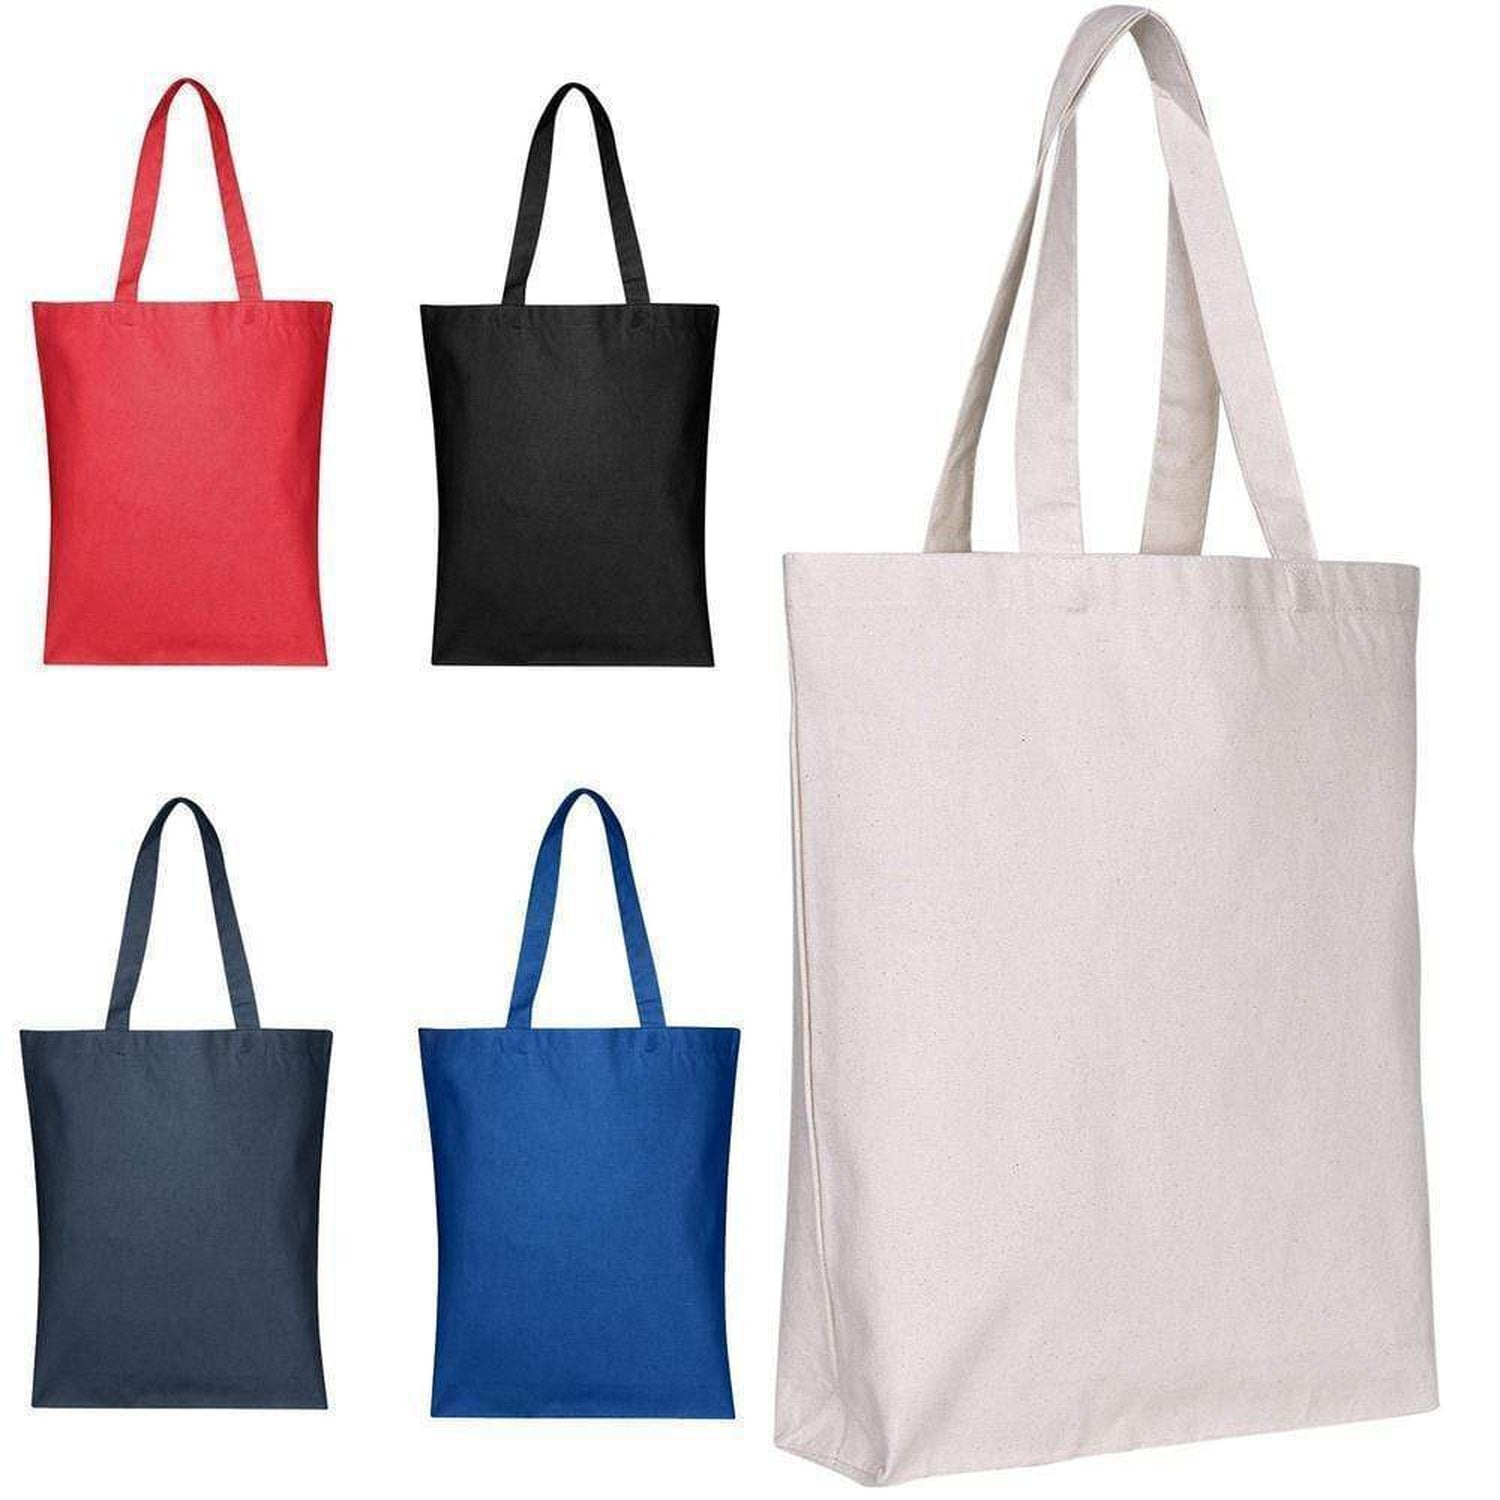 Wholesale Canvas Bags Made In Usa | Literacy Basics